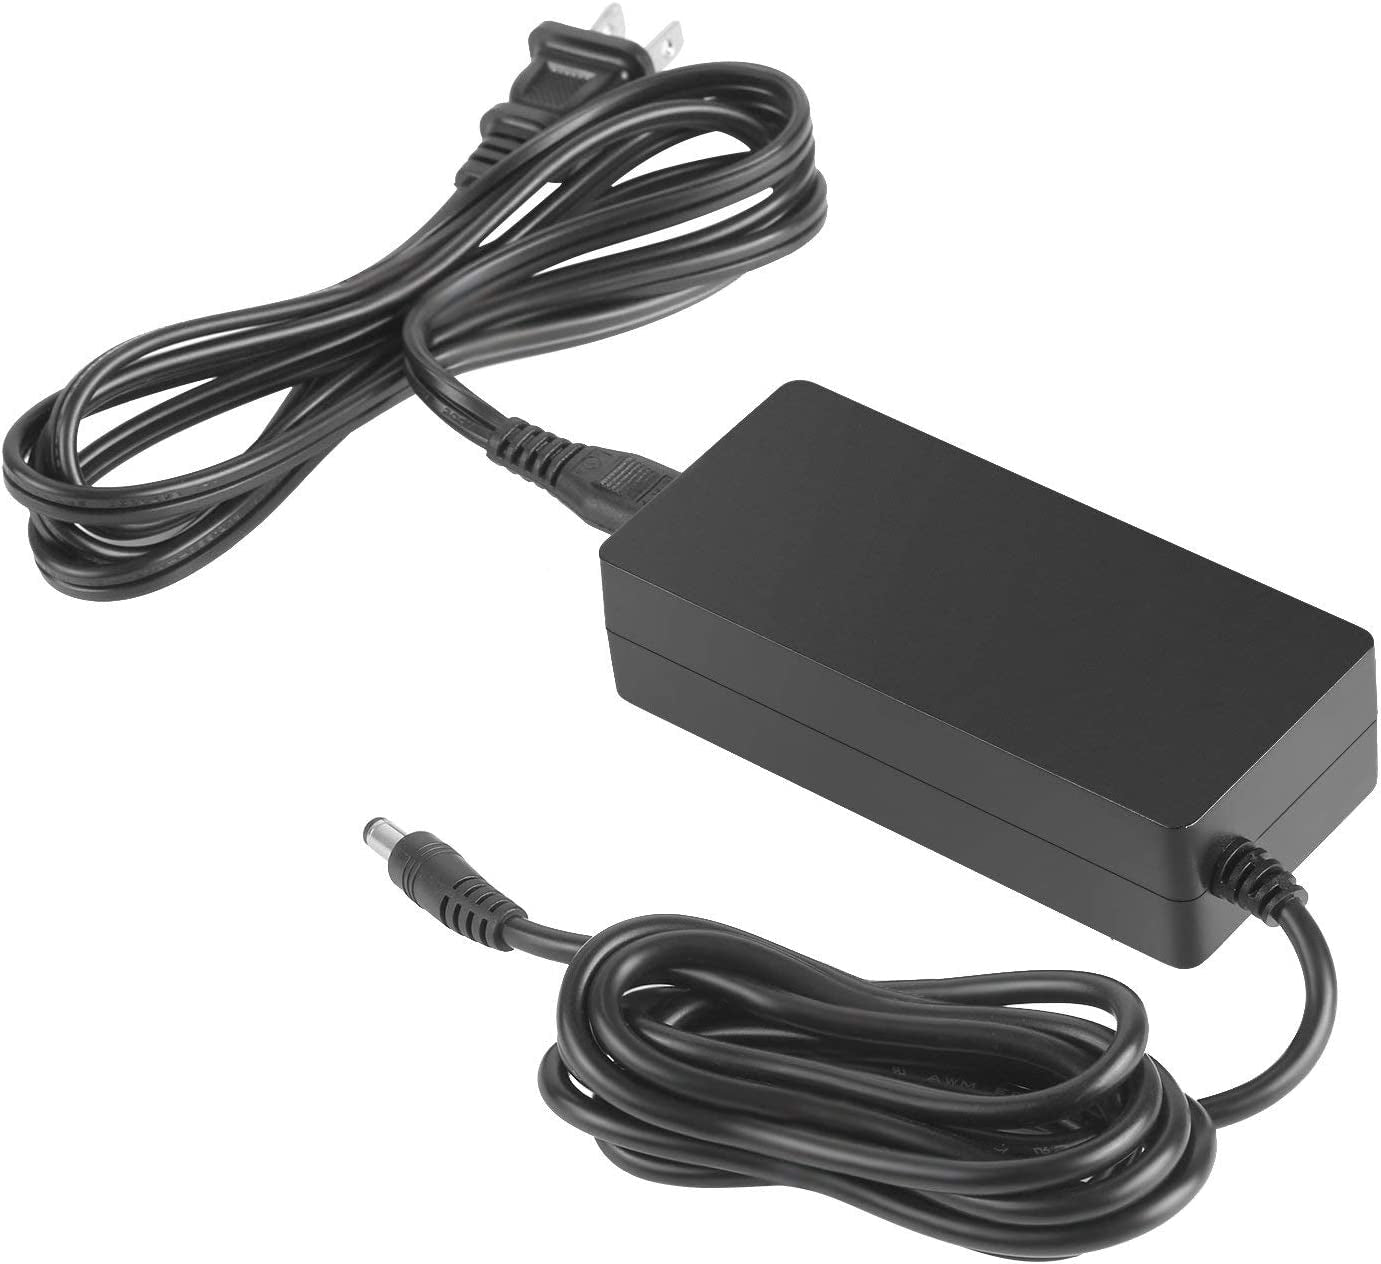 IVISII AC Adapter for R60C, R65C Dual Color Temperature Ring Light and I50, I80 RGB Video Light